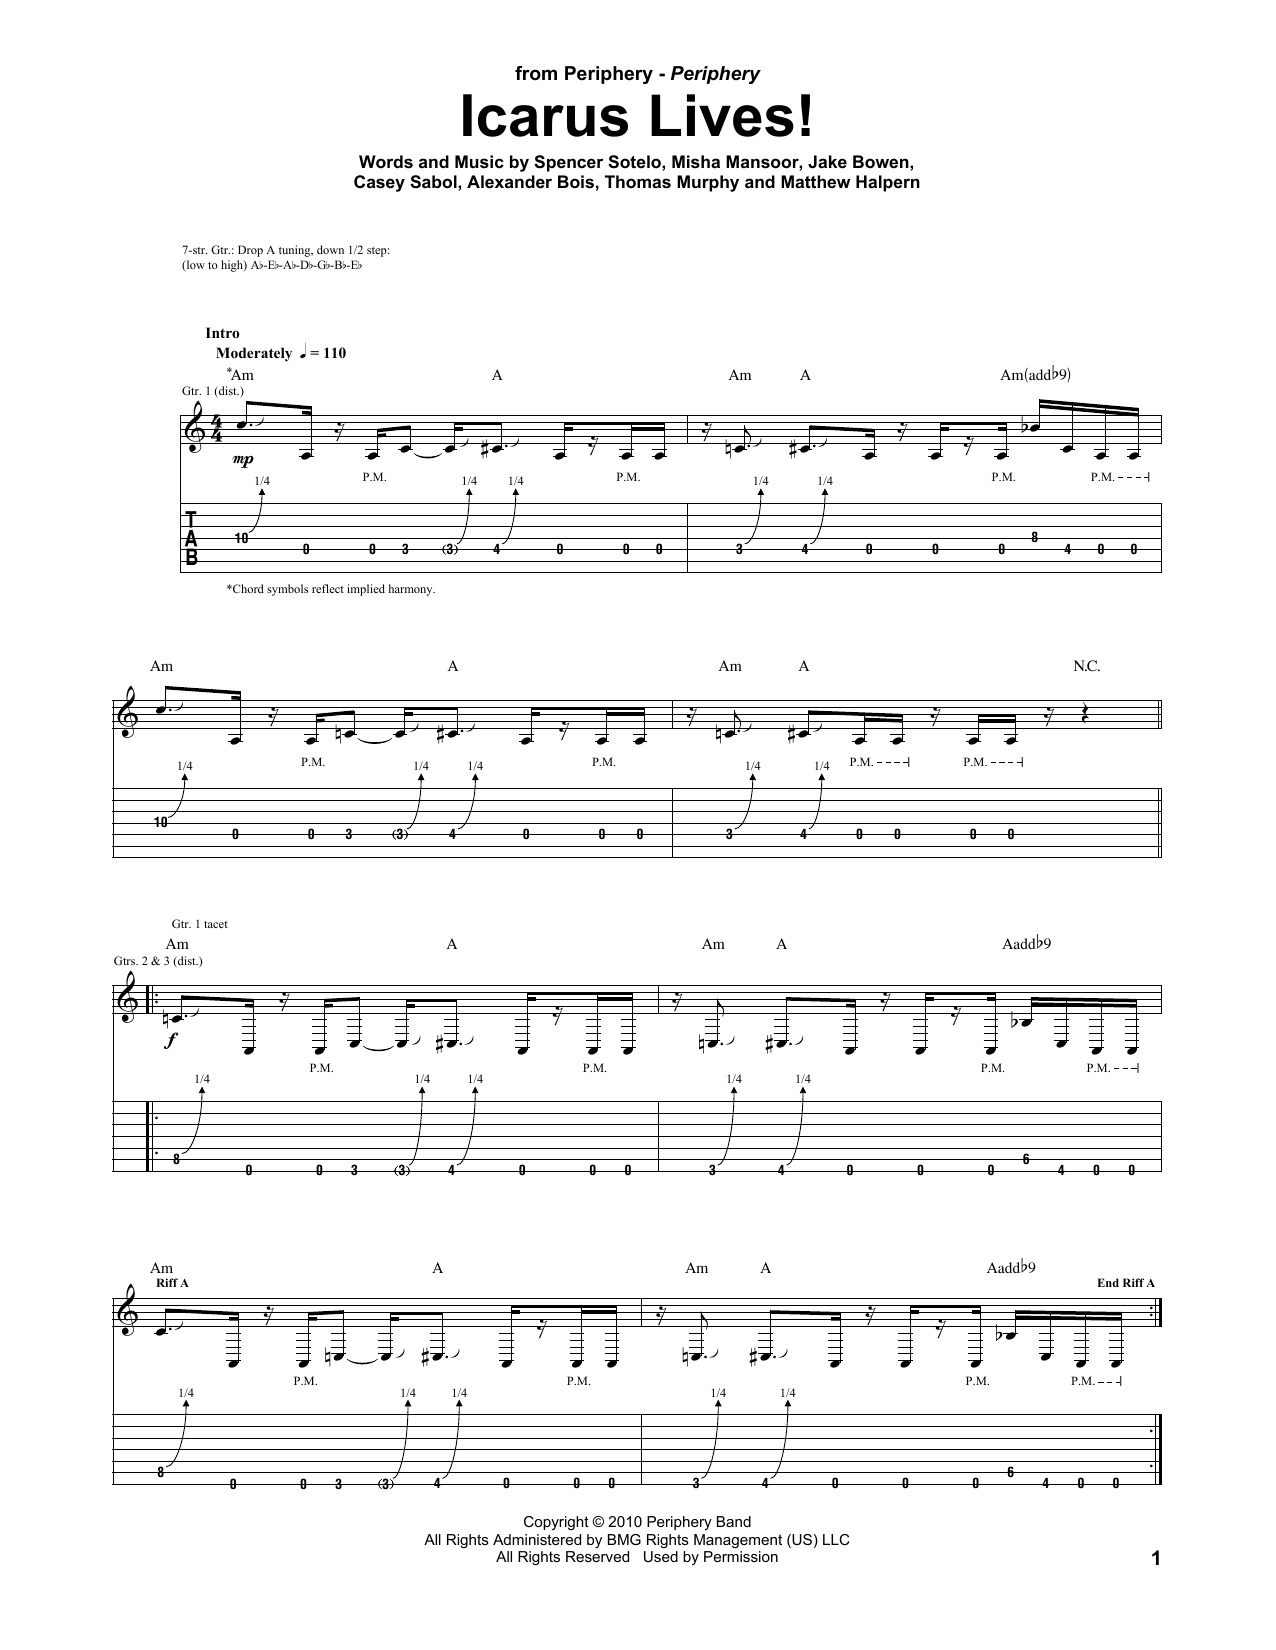 Download Periphery Icarus Lives! Sheet Music